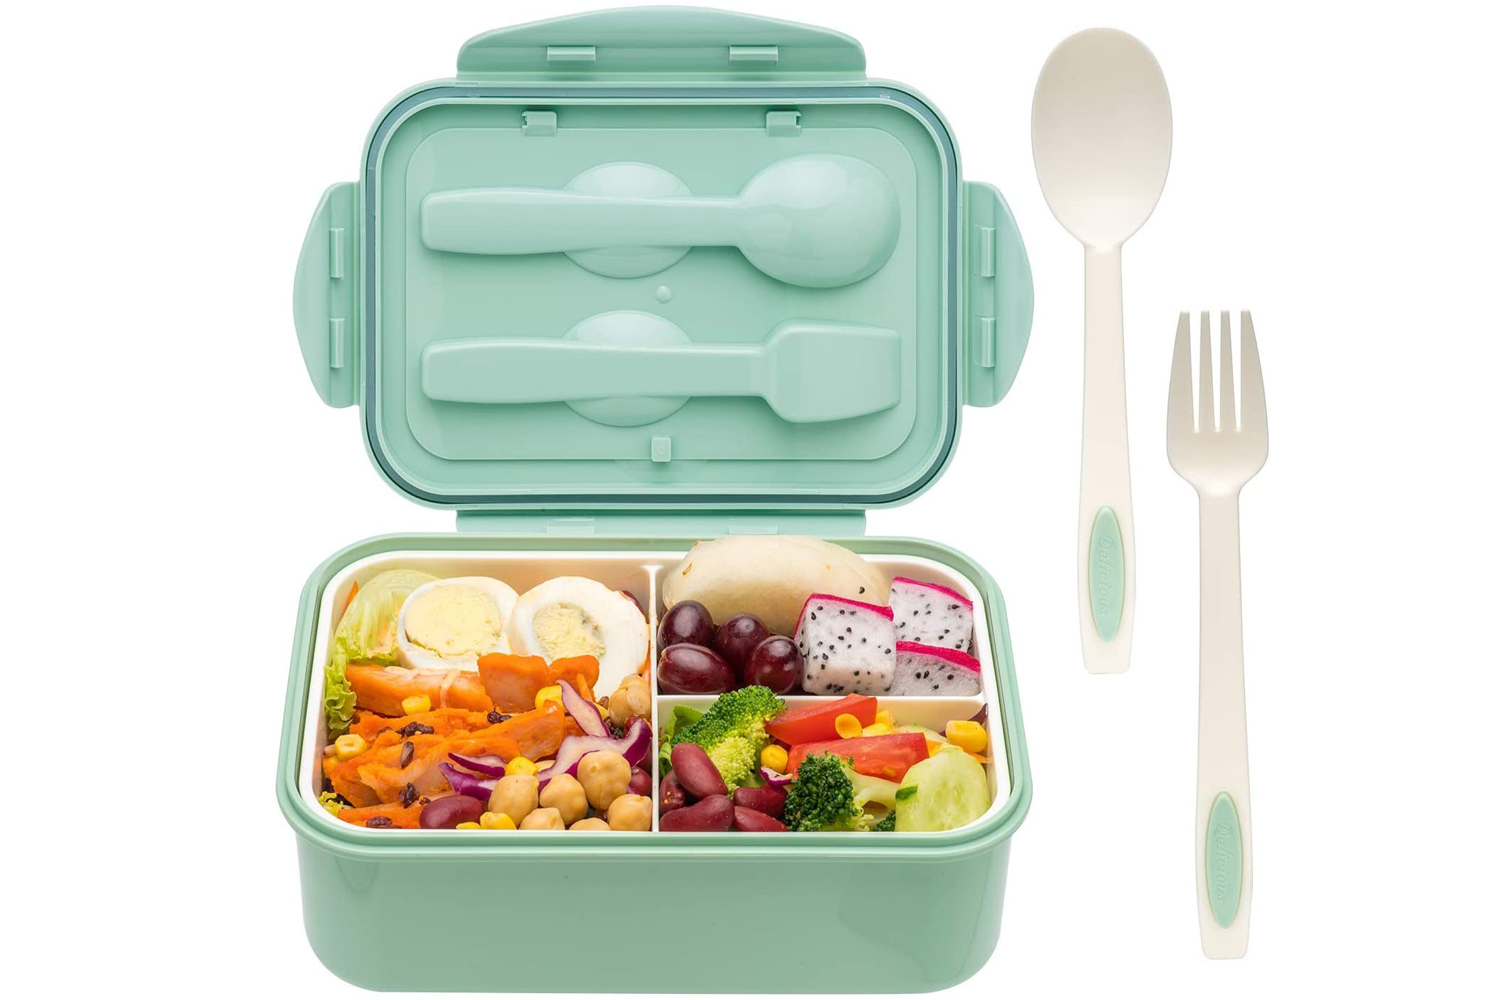 Source Kids Stainless Steel Food Warmer Container Set Electric Heated  Insulated Bento Lunch Box on m.